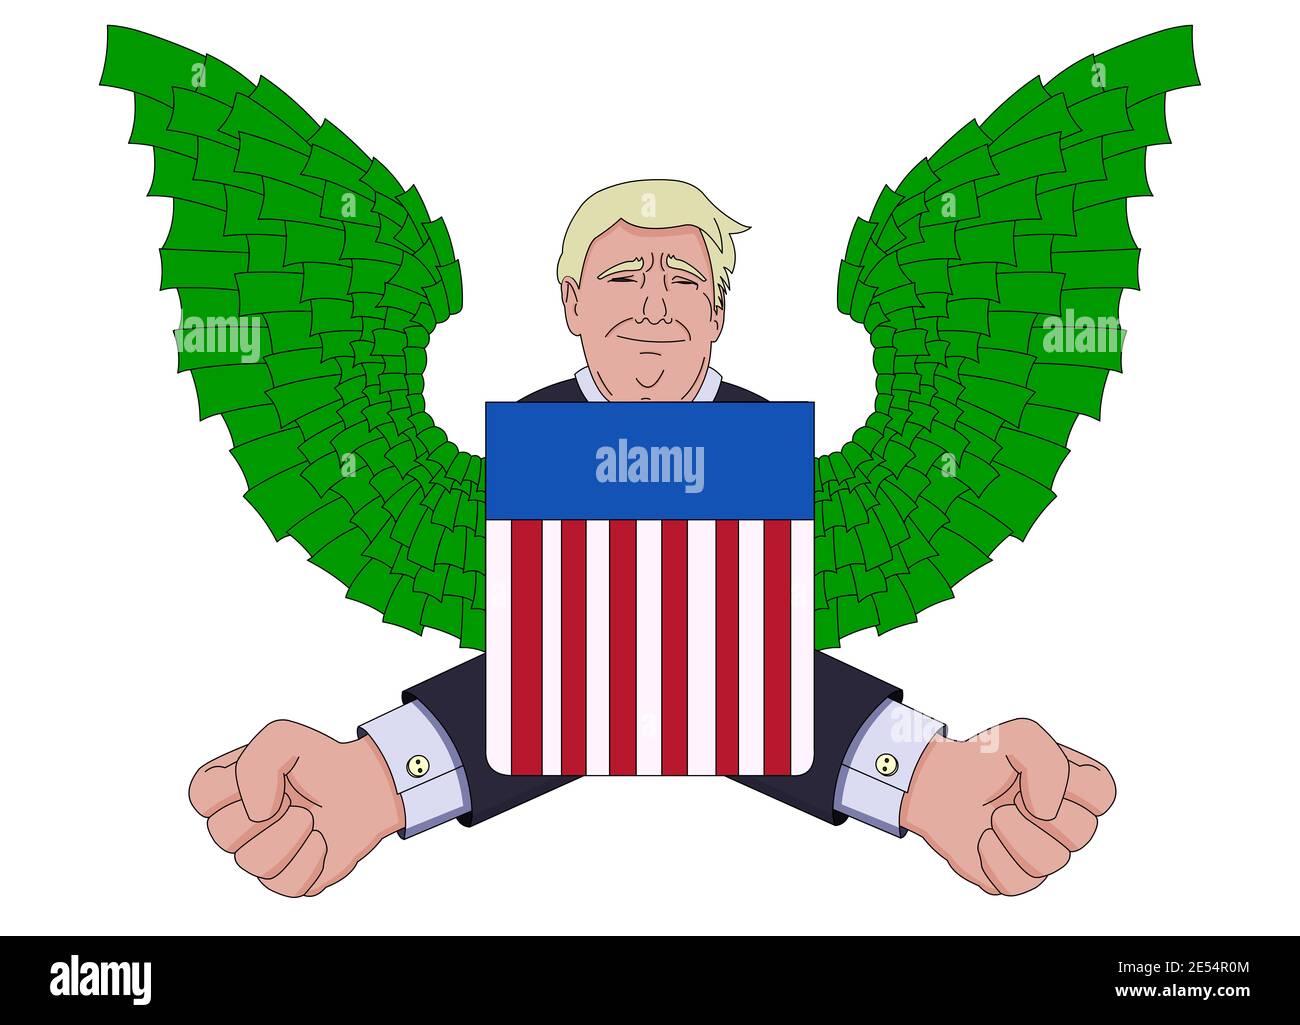 Donald Trump face cartoon style with flag and wings of banknotes isolated on background. Stock Photo